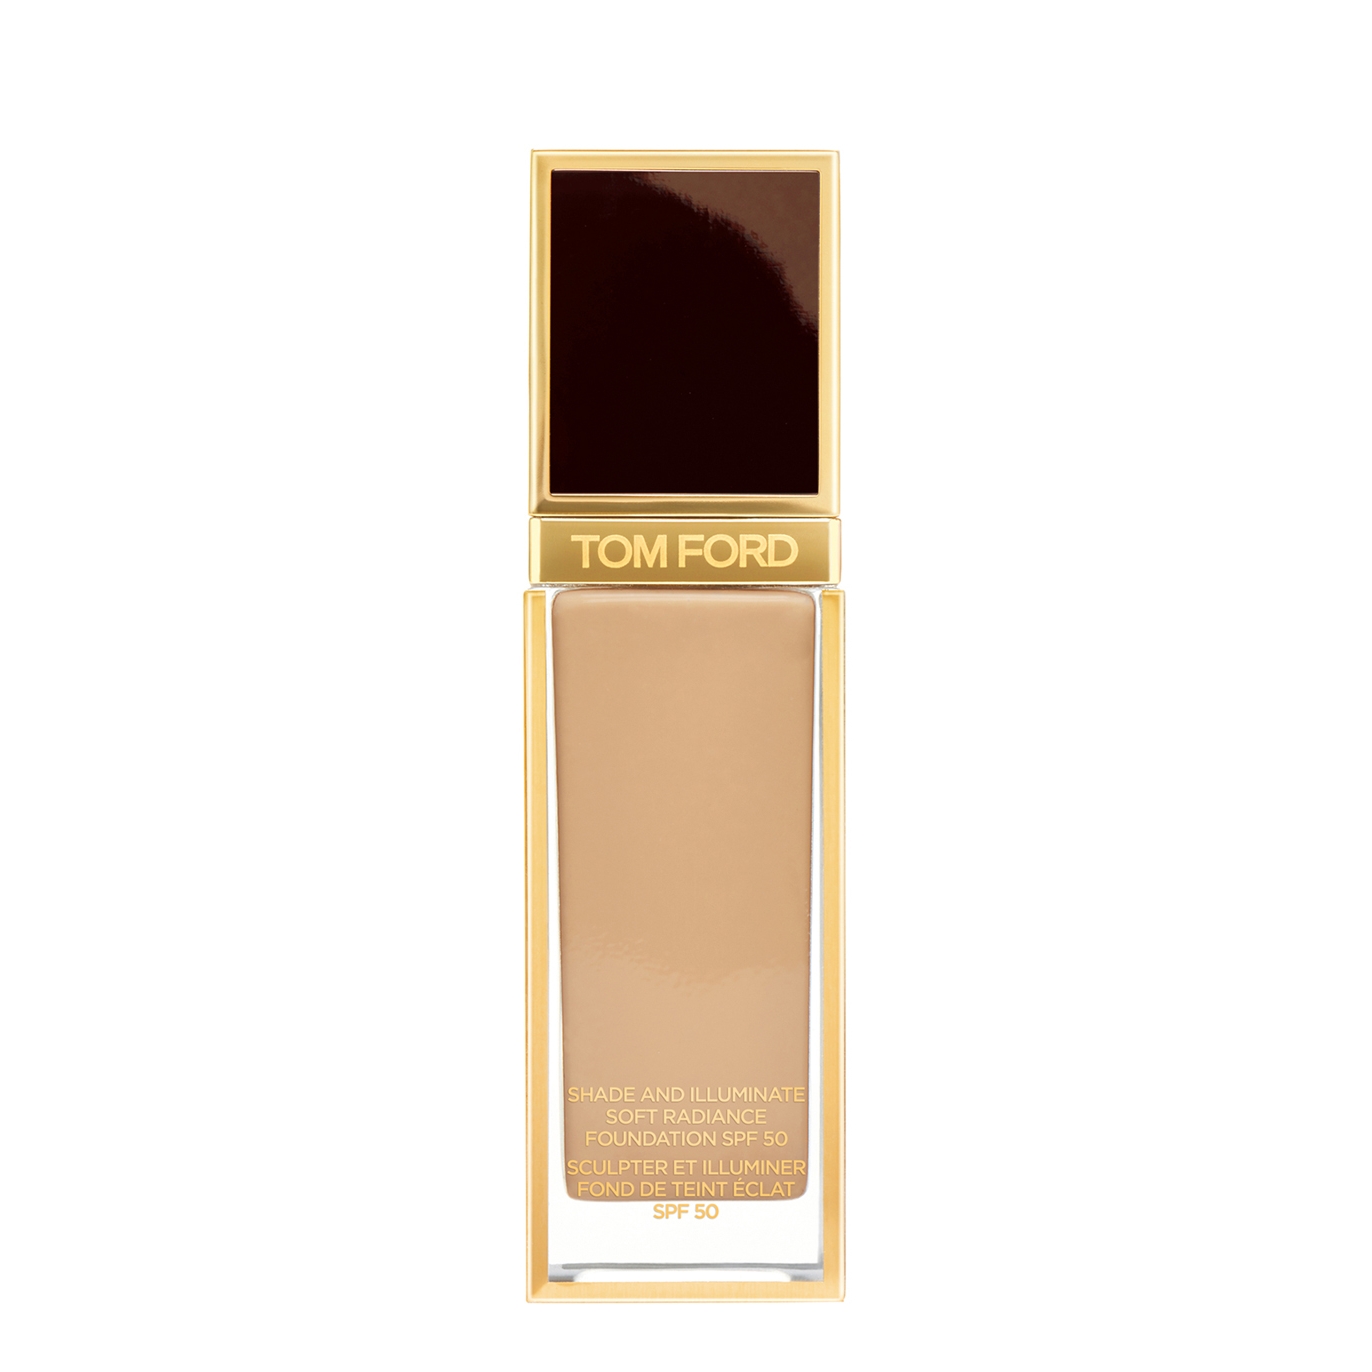 Tom Ford Shade And Illuminate Soft Radiance Foundation Spf 50, Tawny, Luminous Complexion, Sun Prote In White